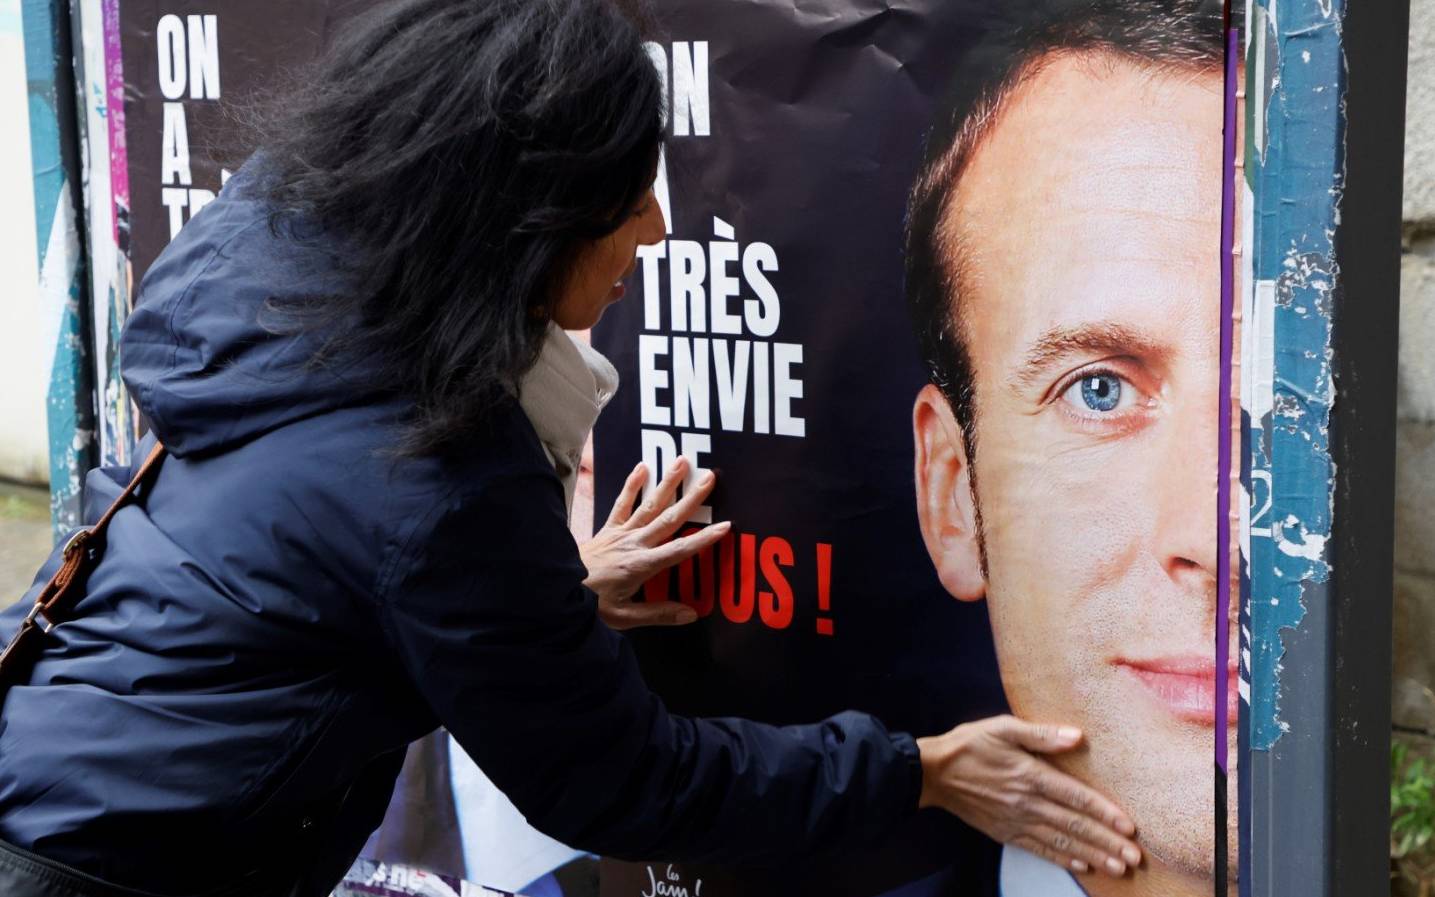 LREM and "Les Jeunes avec Macron" (JAM) supporters stick posters asking for the French president Emmanuel Macron's candidacy to the French presidential election, in Issy-les-Moulineaux, near Paris, on February 18, 2022, ahead of the April 2022 French presidential election. (Photo by Ludovic MARIN / AFP)